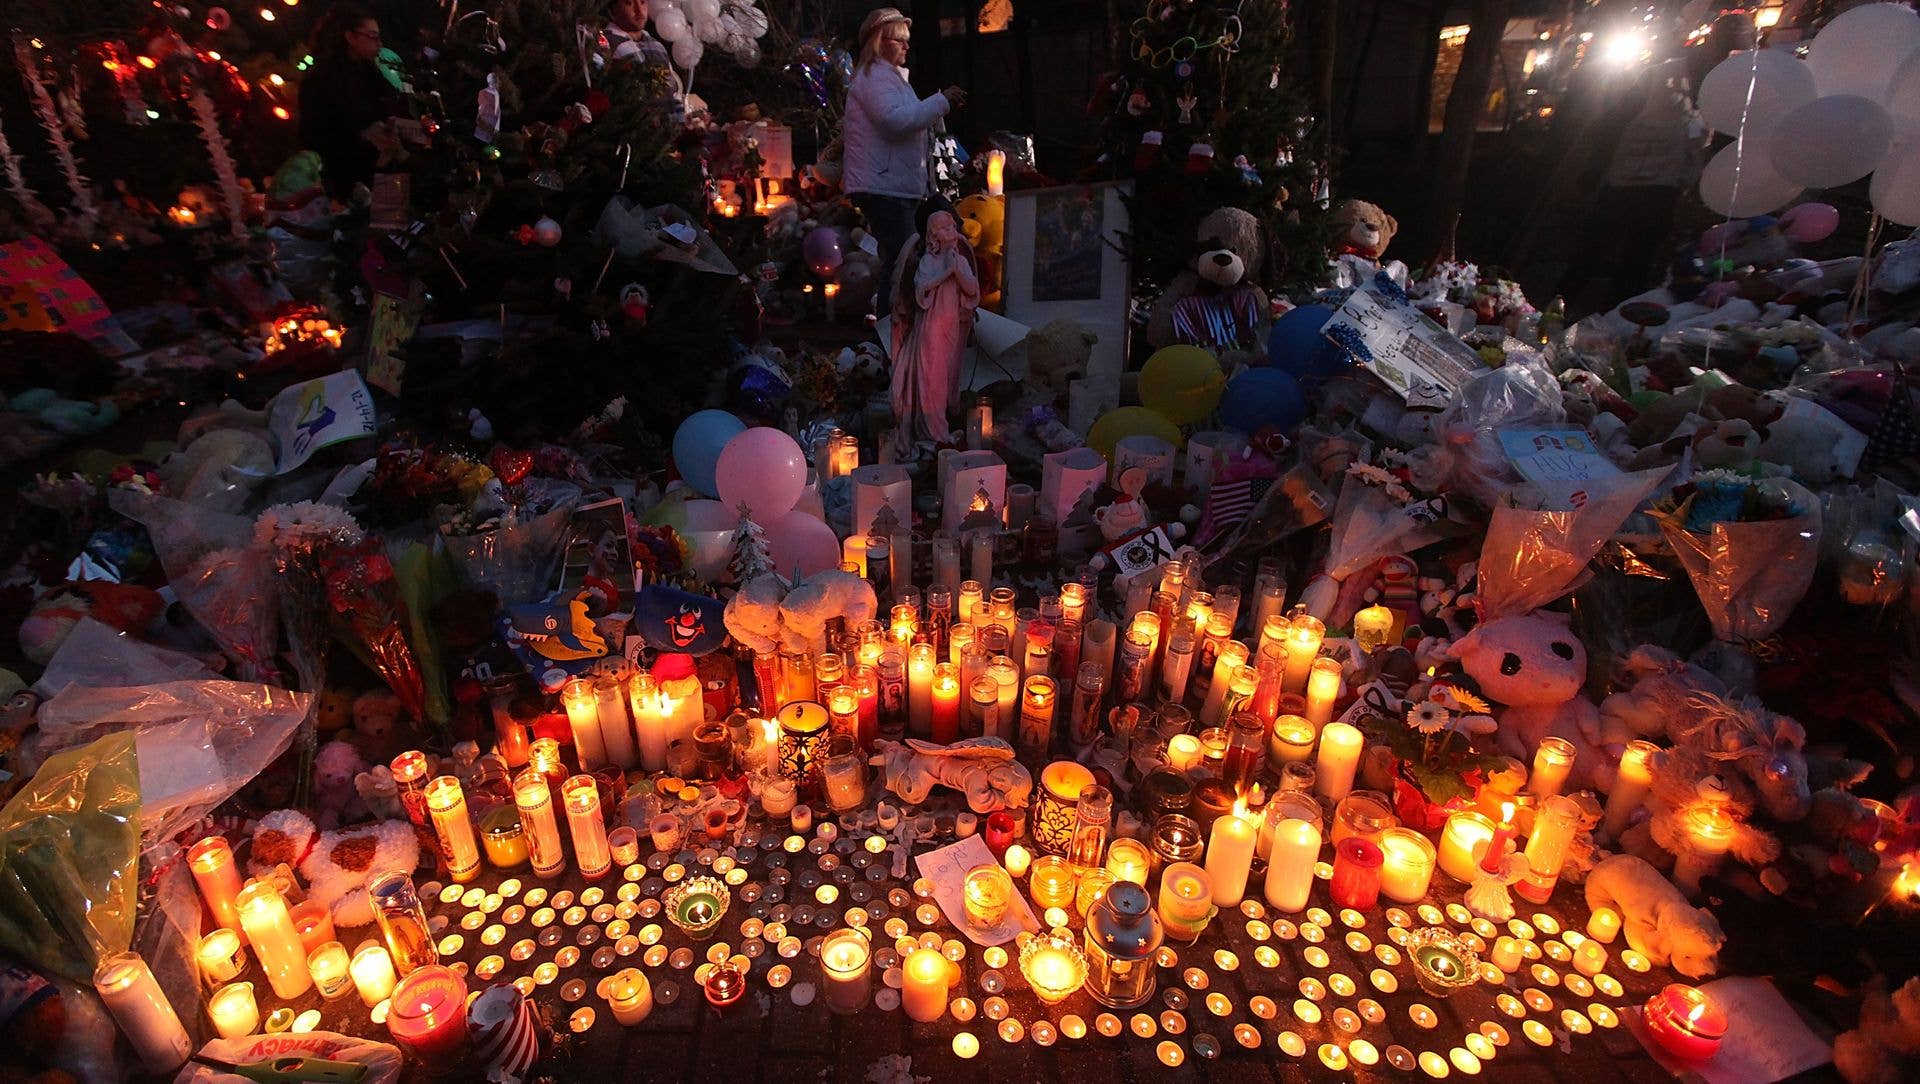 Candles are lit among mementos at a memorial for victims of the mass shooting at Sandy Hook Elementary School